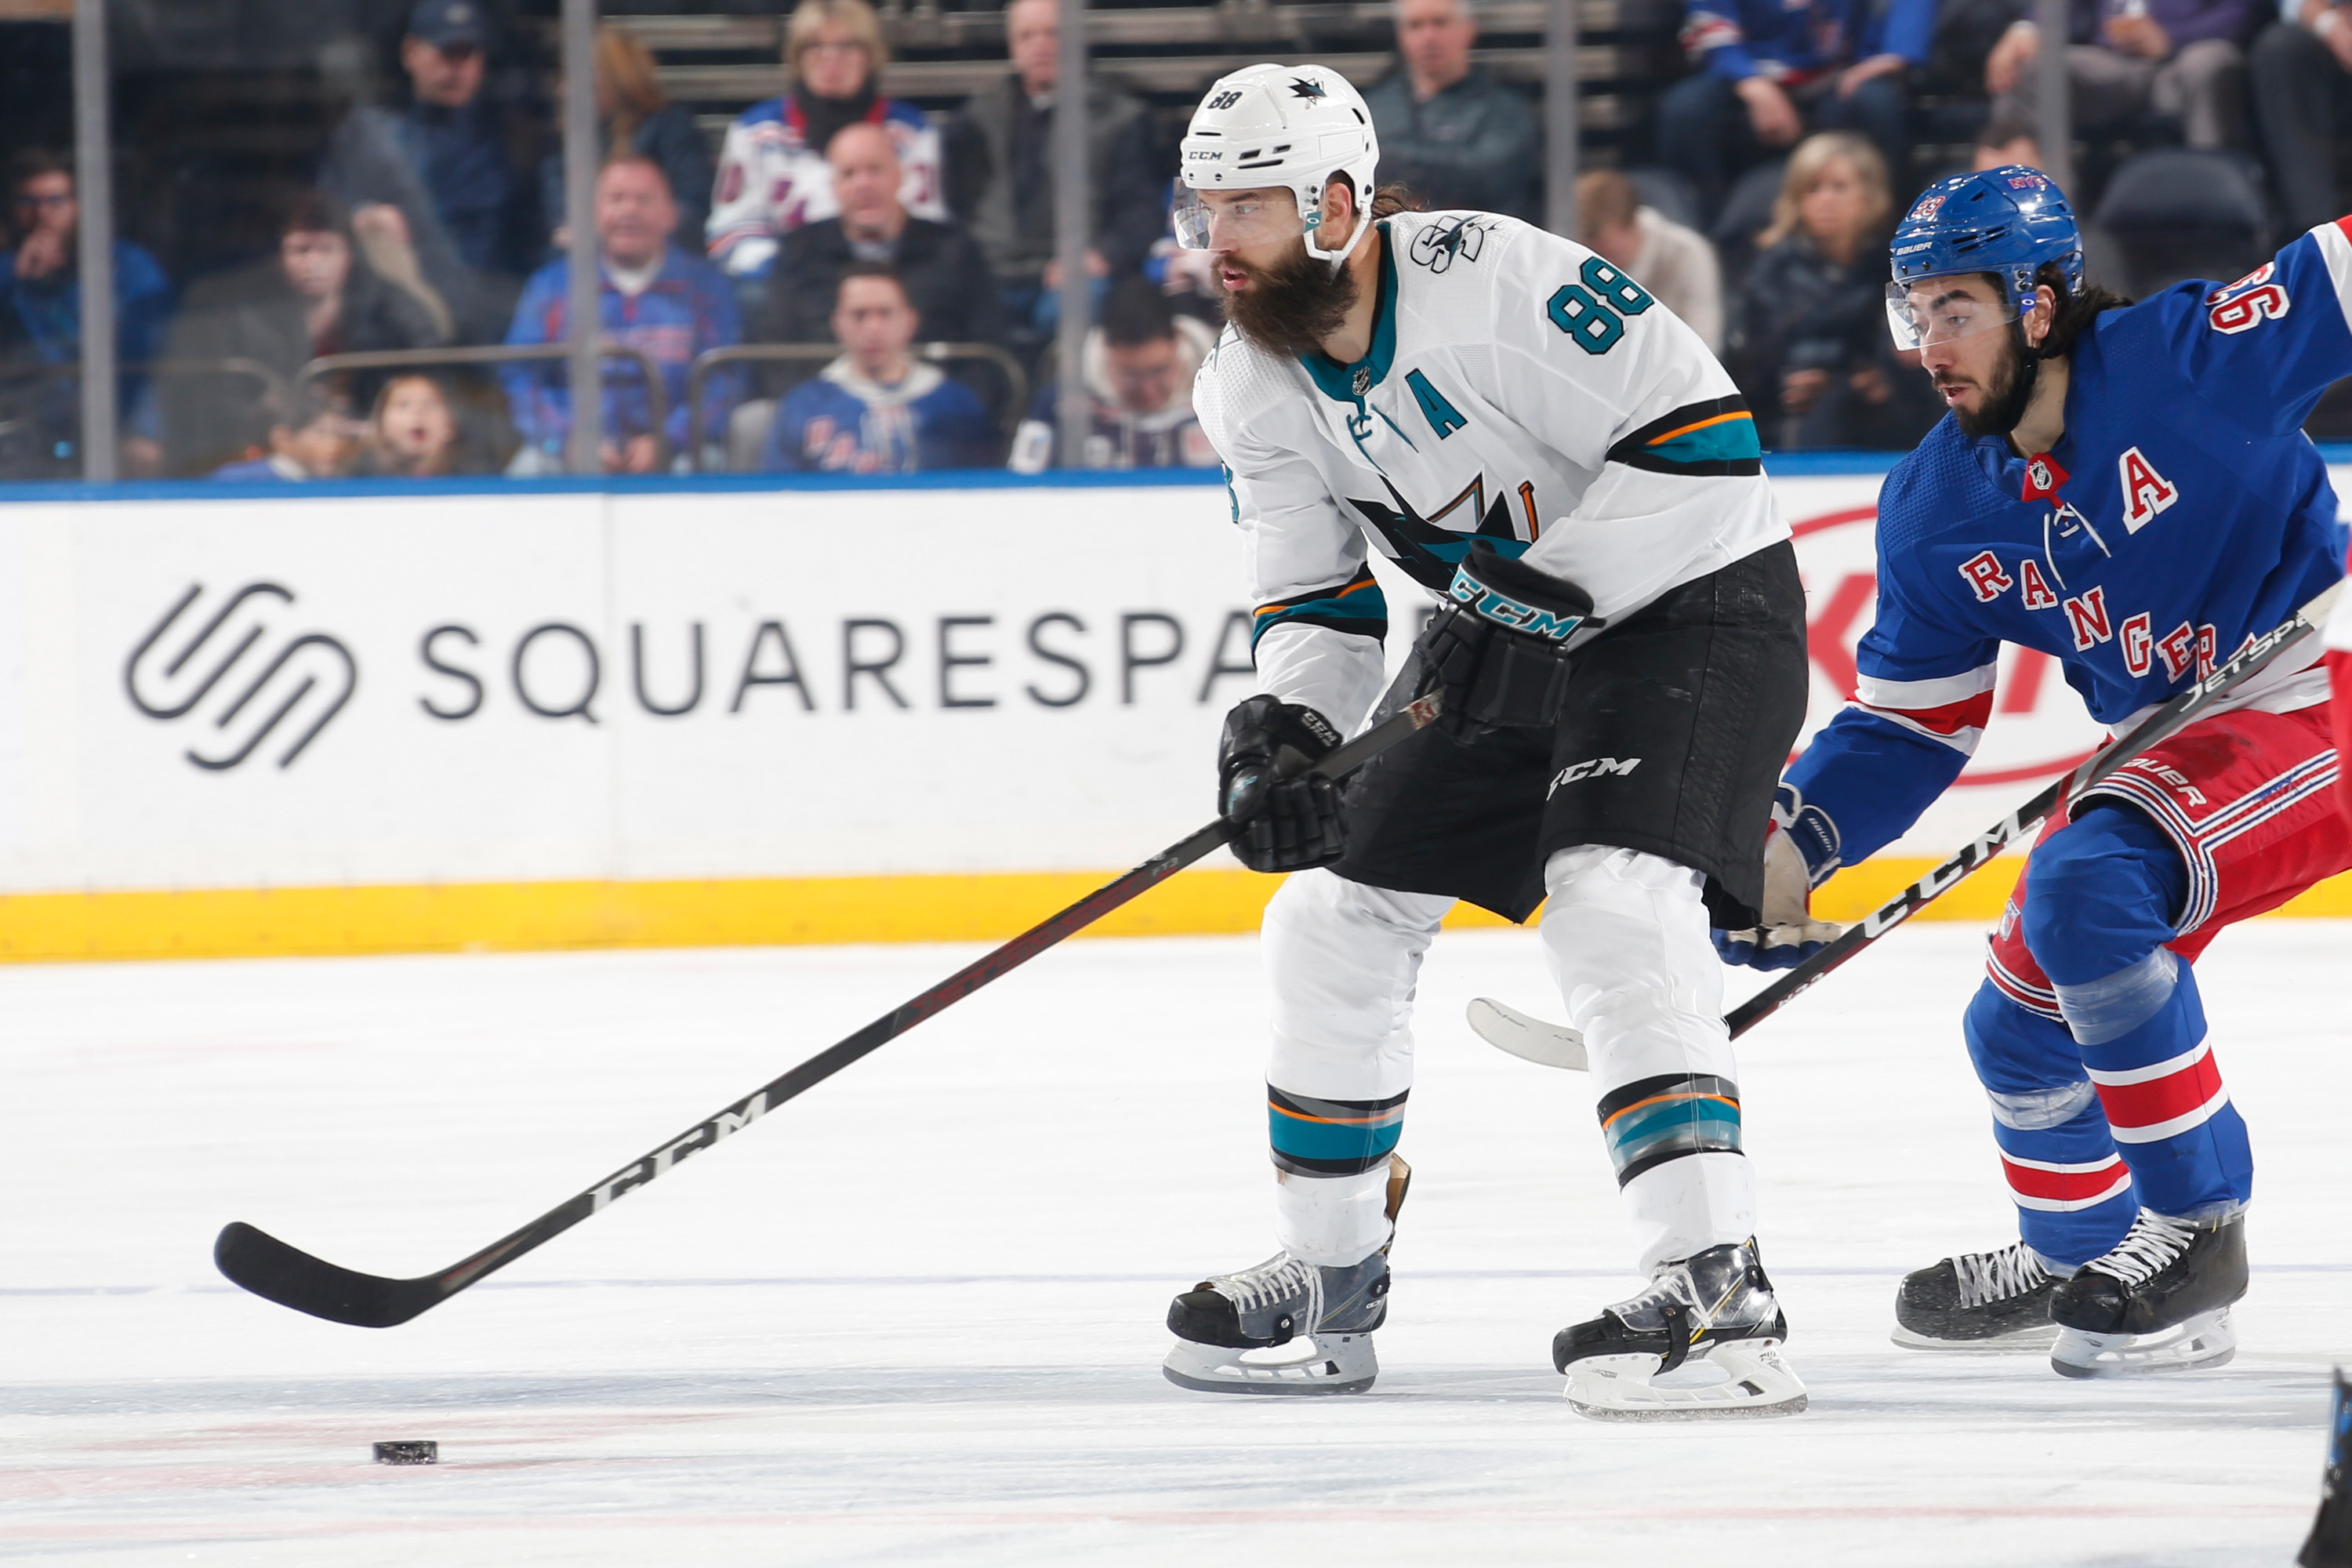 Brent Burns #88 of the San Jose Sharks skates with the puck against the New York Rangers at Madison Square Garden on February 22, 2020 in New York City.